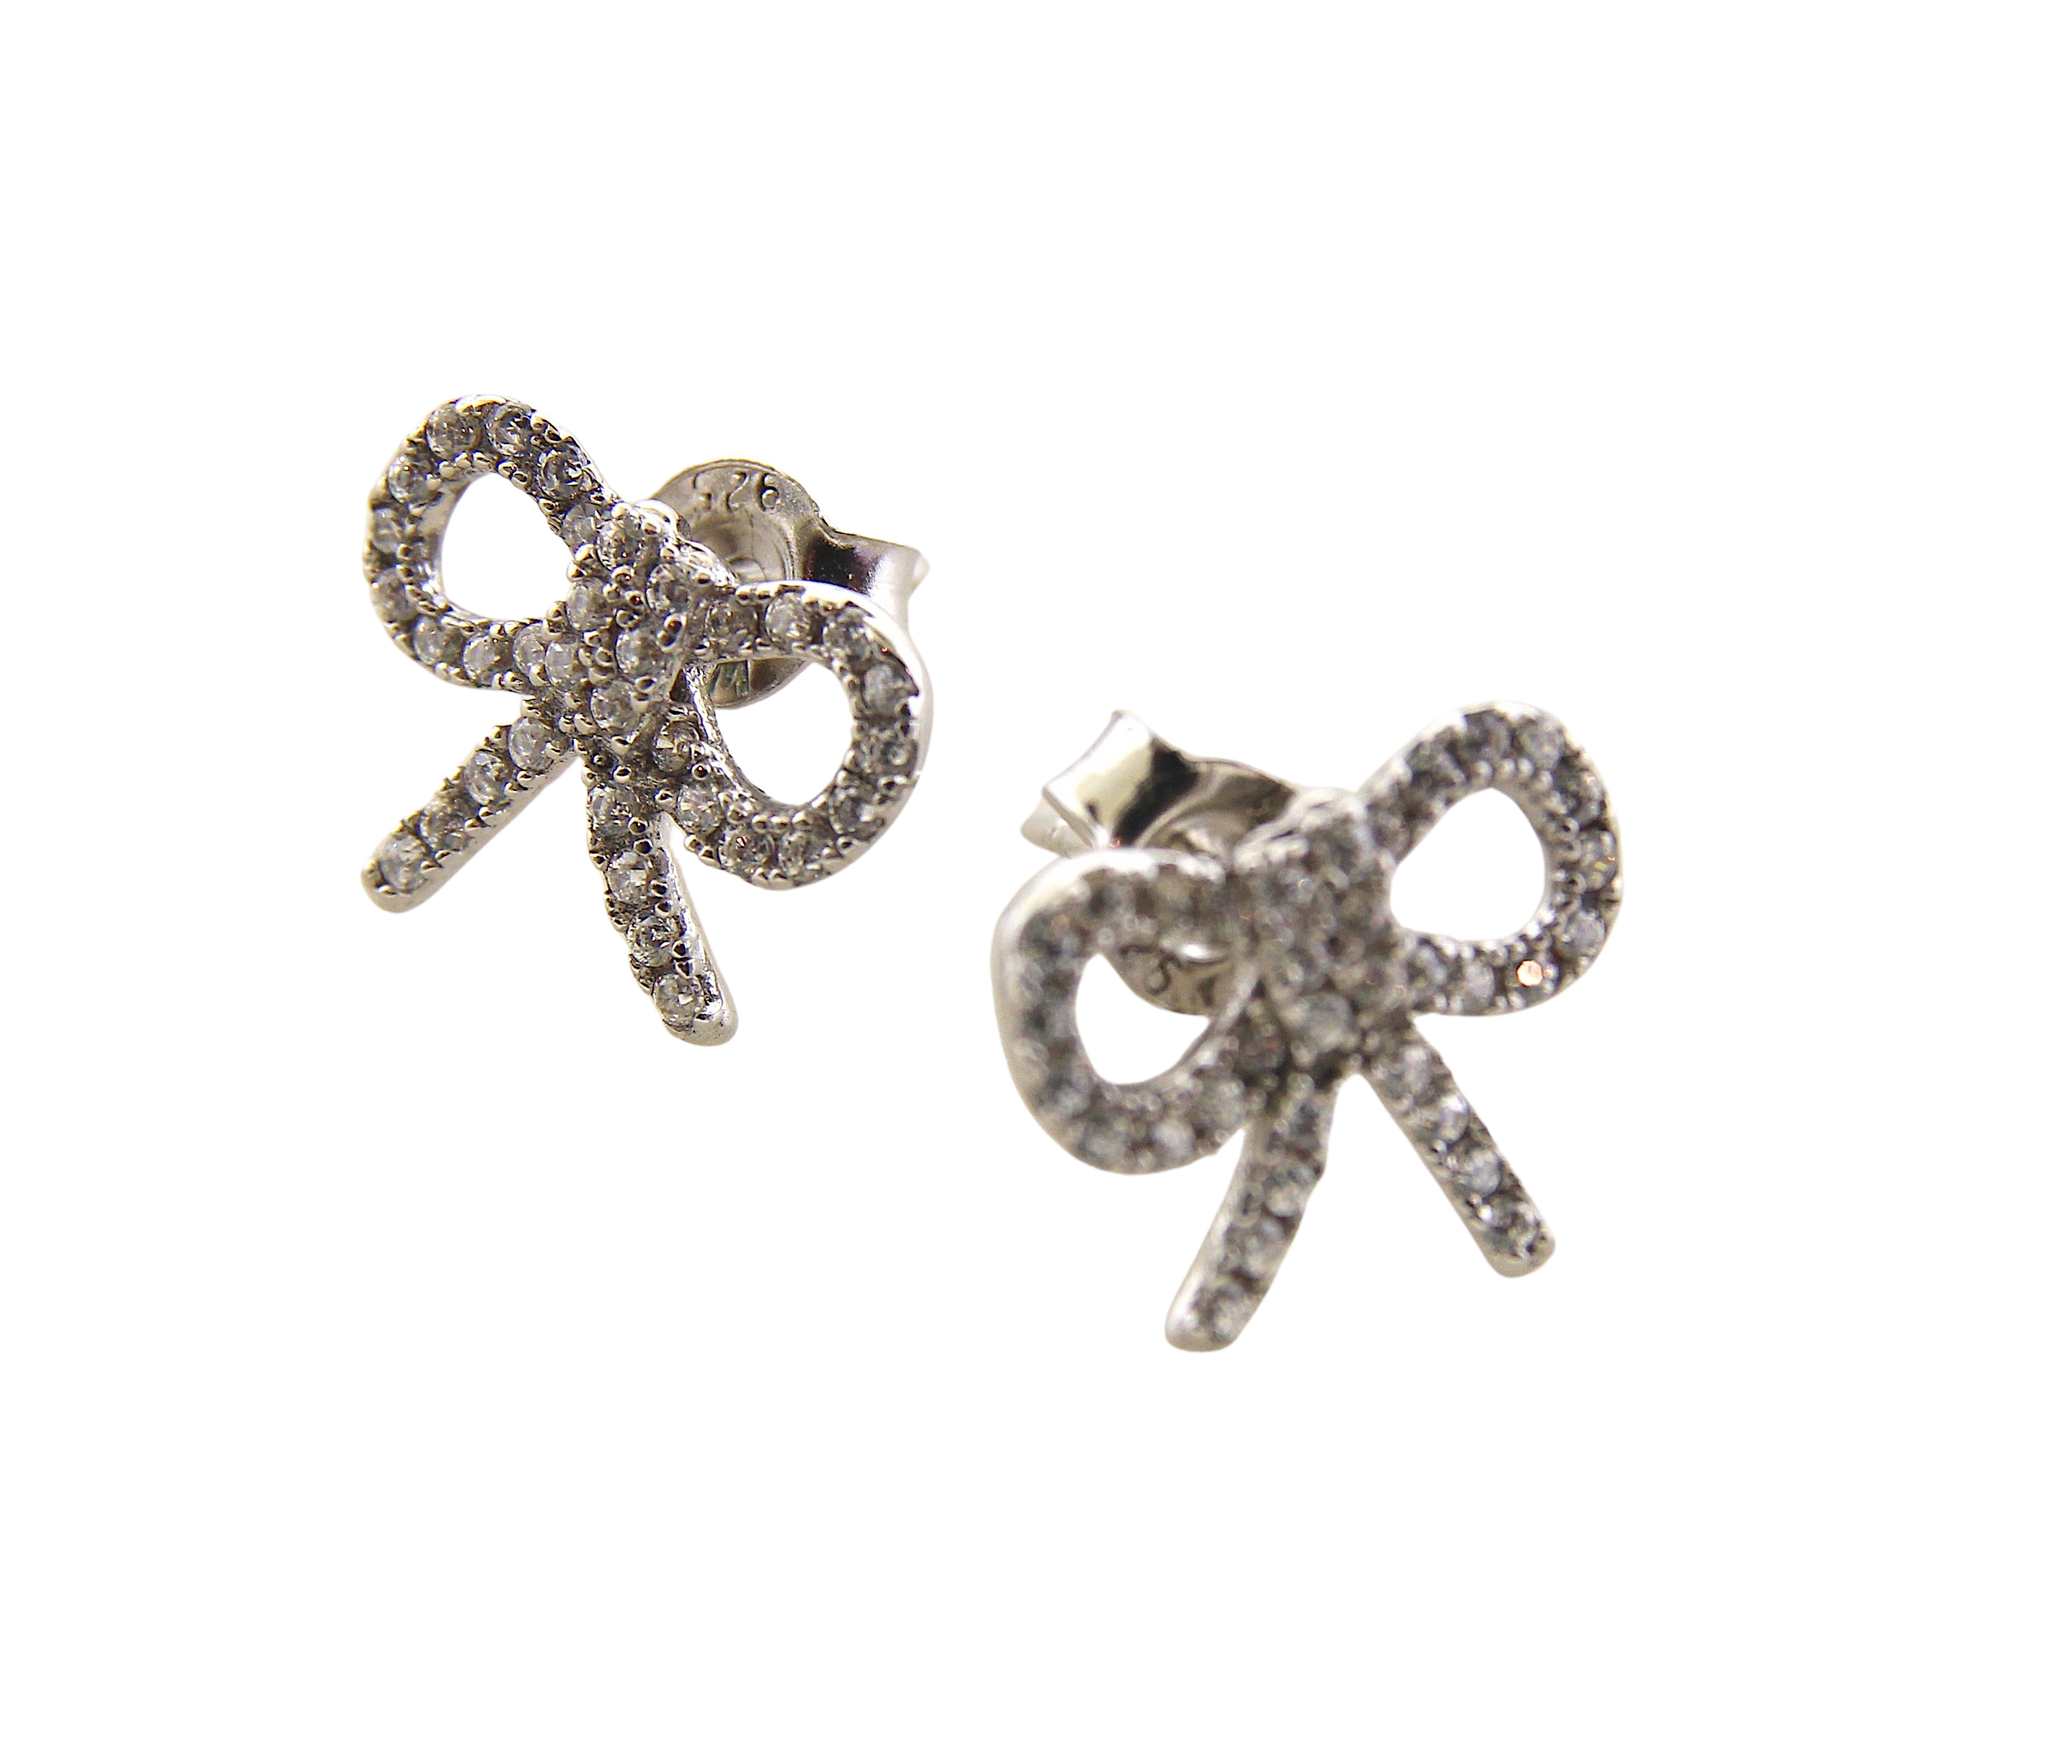 Sterling Silver Pave Bow Earrings